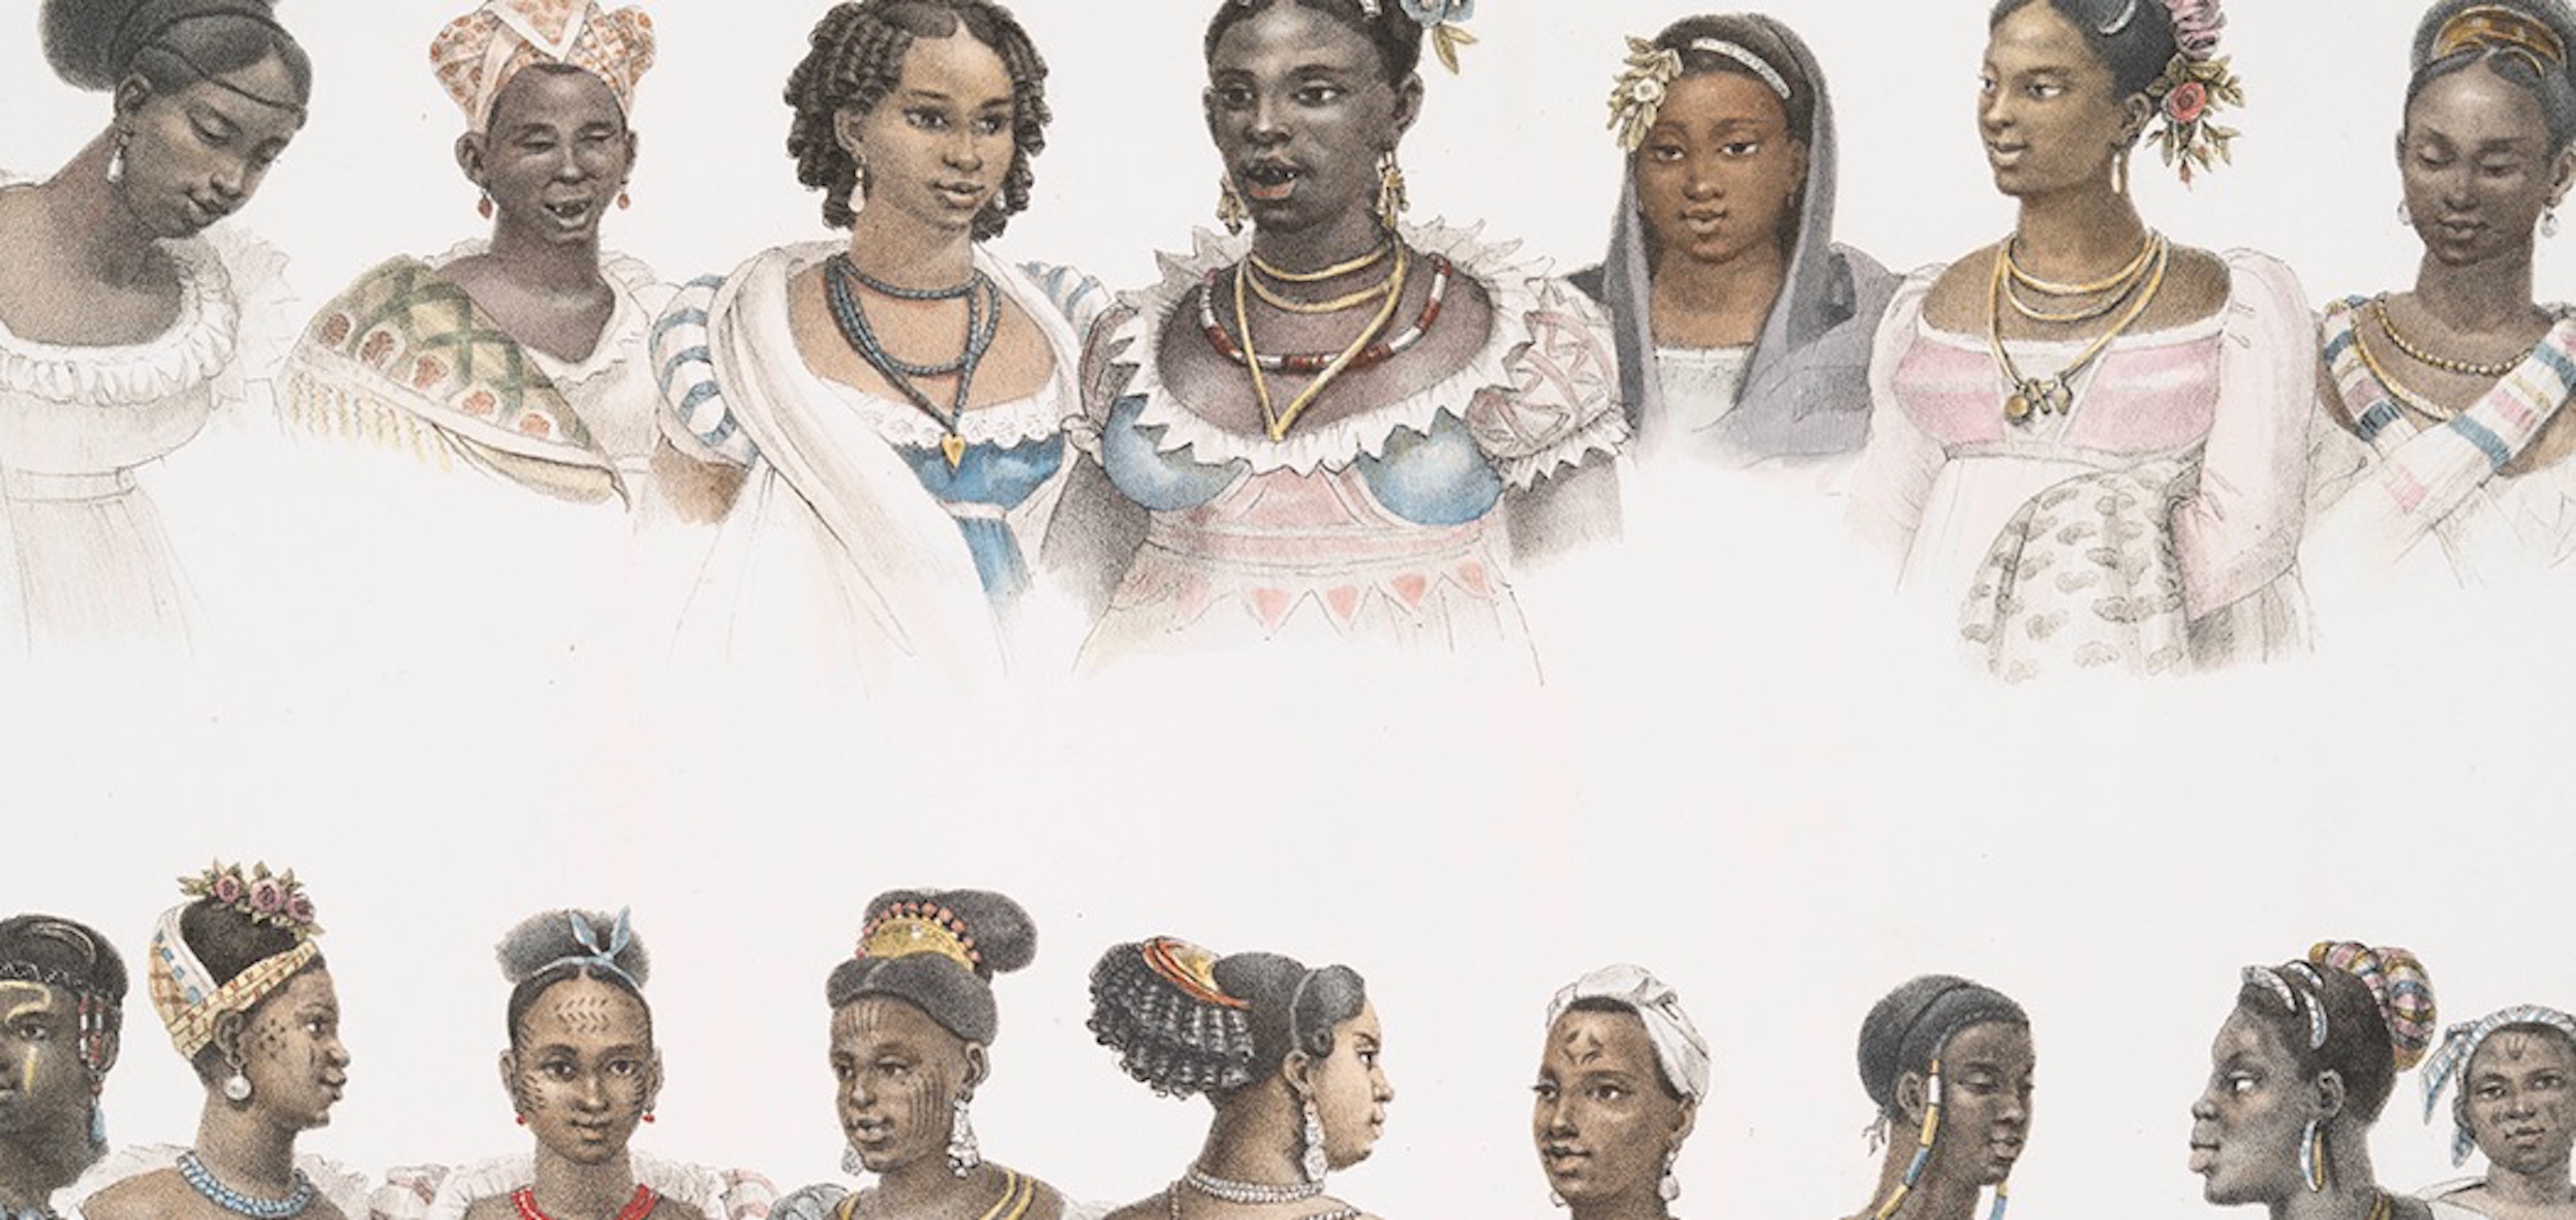 Escape as Resistance for Enslaved Women During the American Revolution